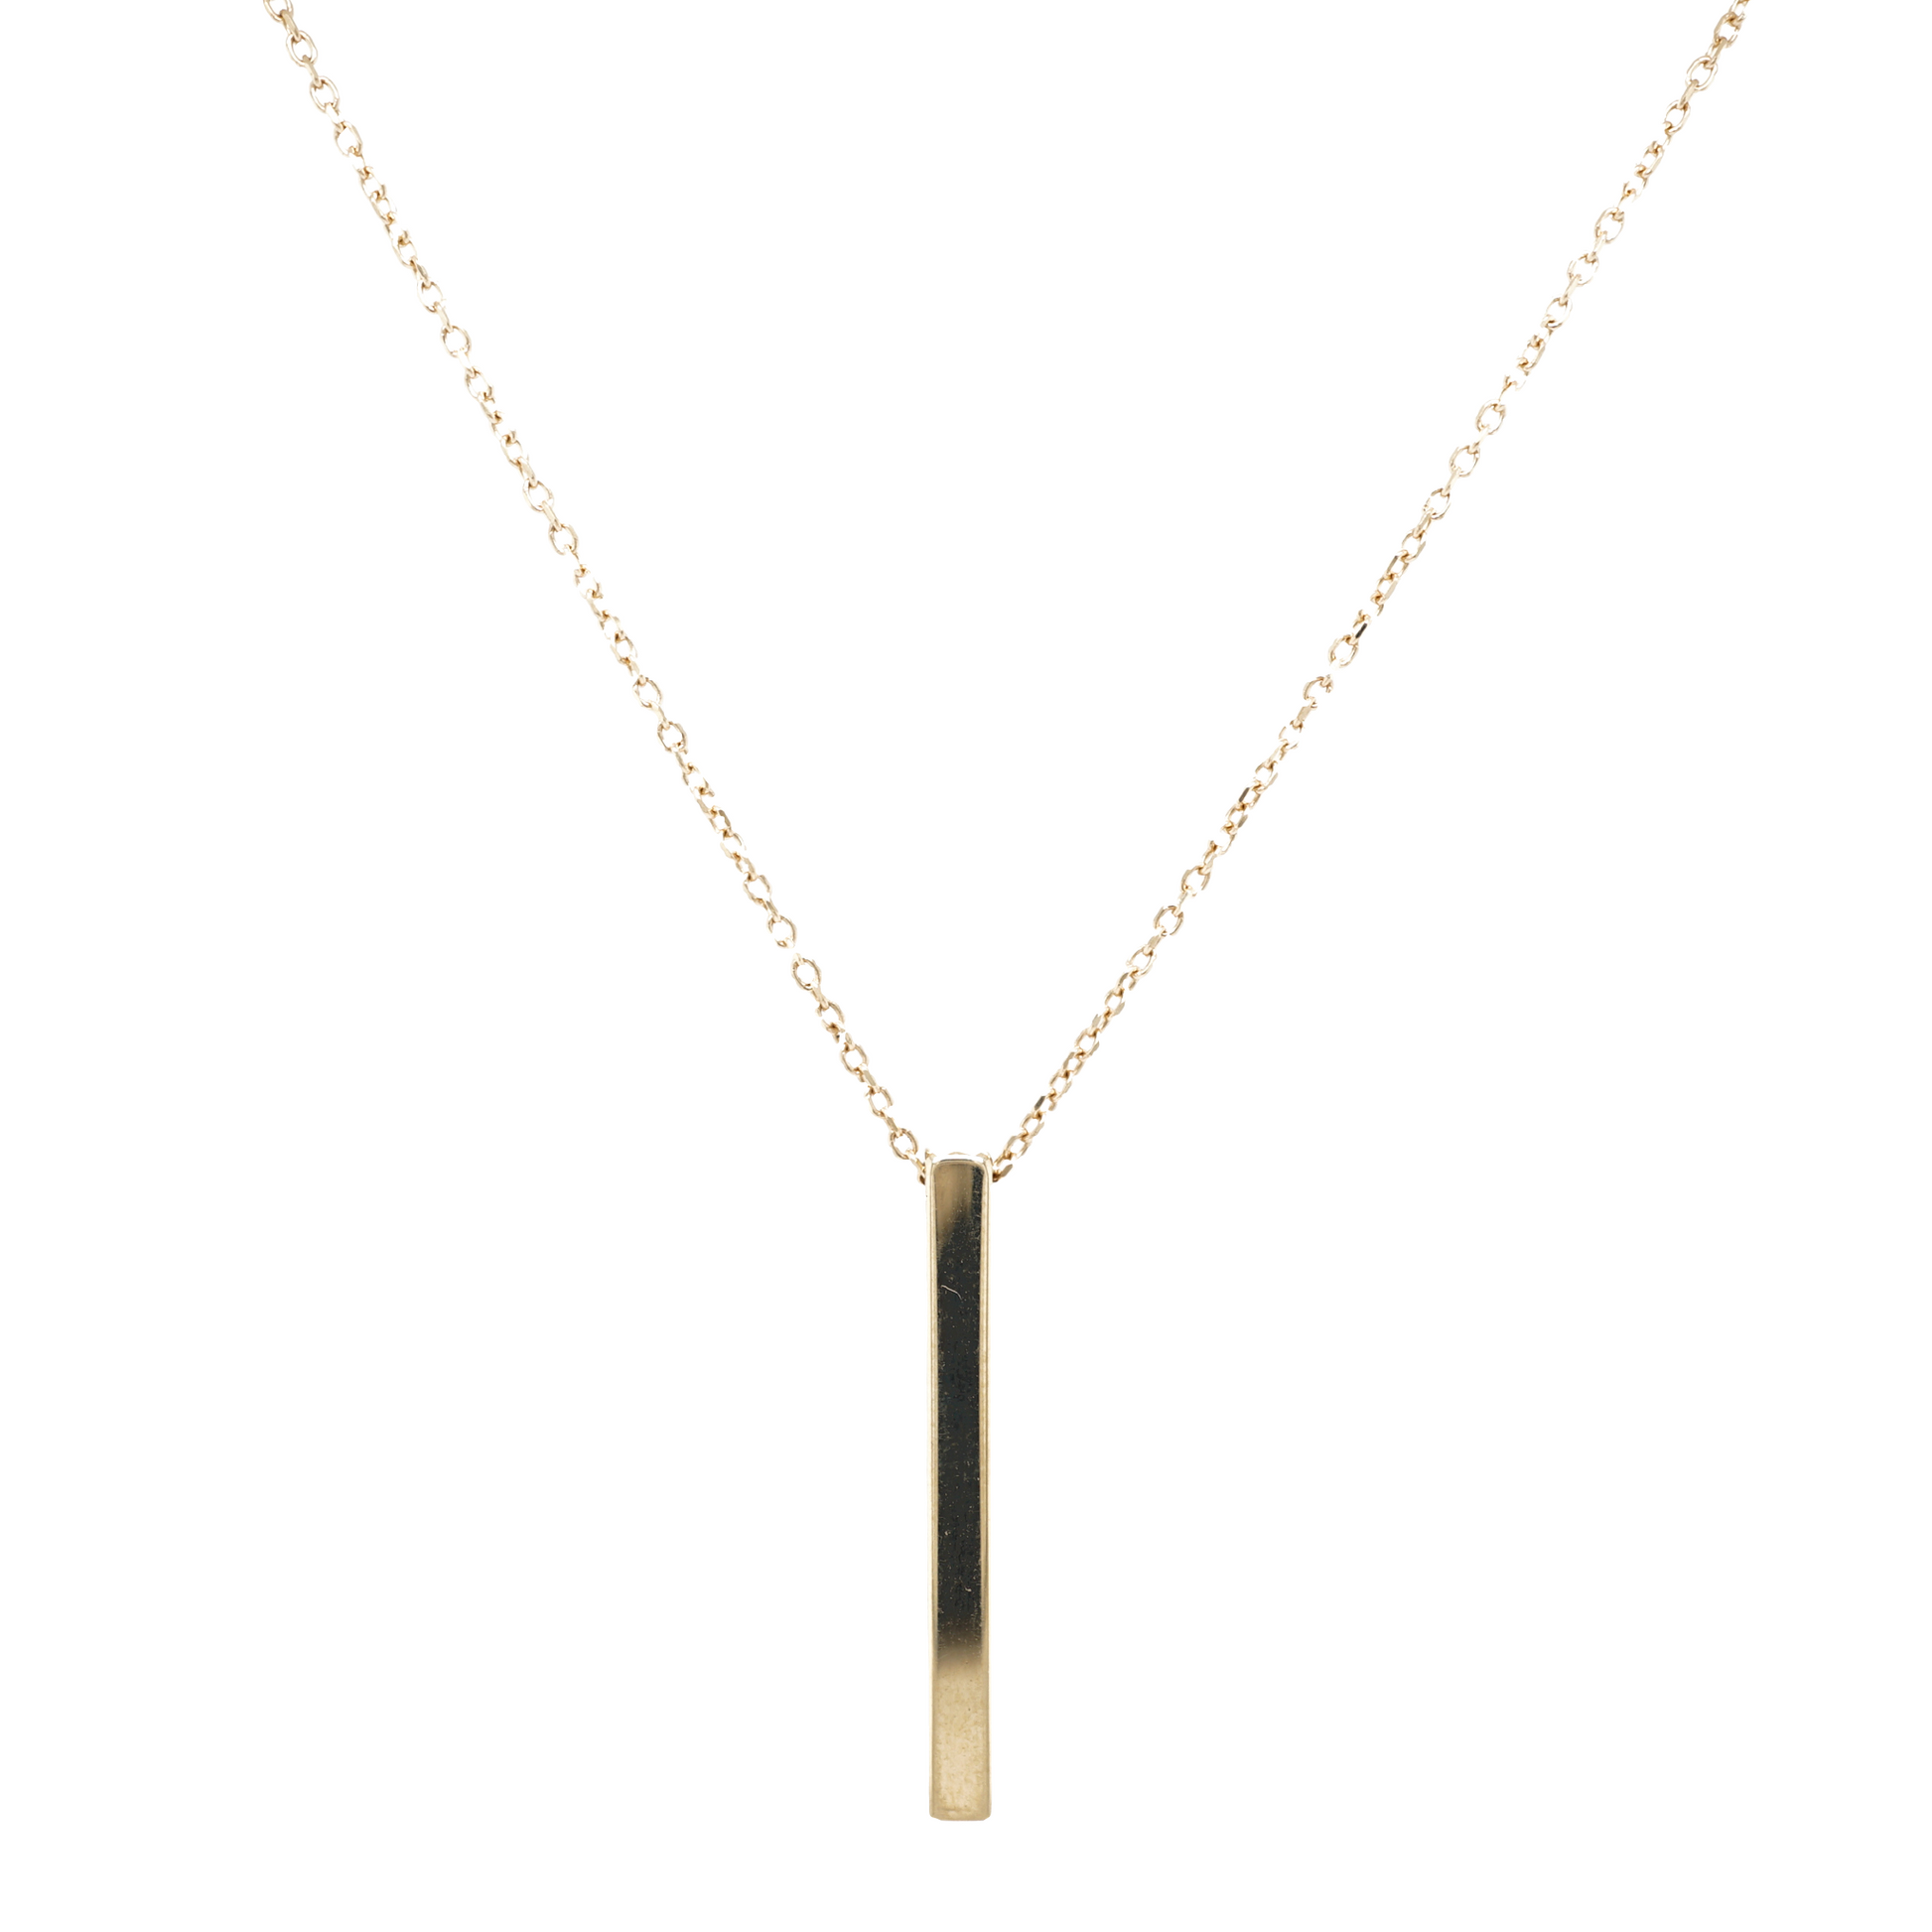 Vertical Bar Pendant Necklace in 14k Yellow GoldComposition: PlatinumTotal Gram Weight: 3.1 gInscription: MS CO 14k 